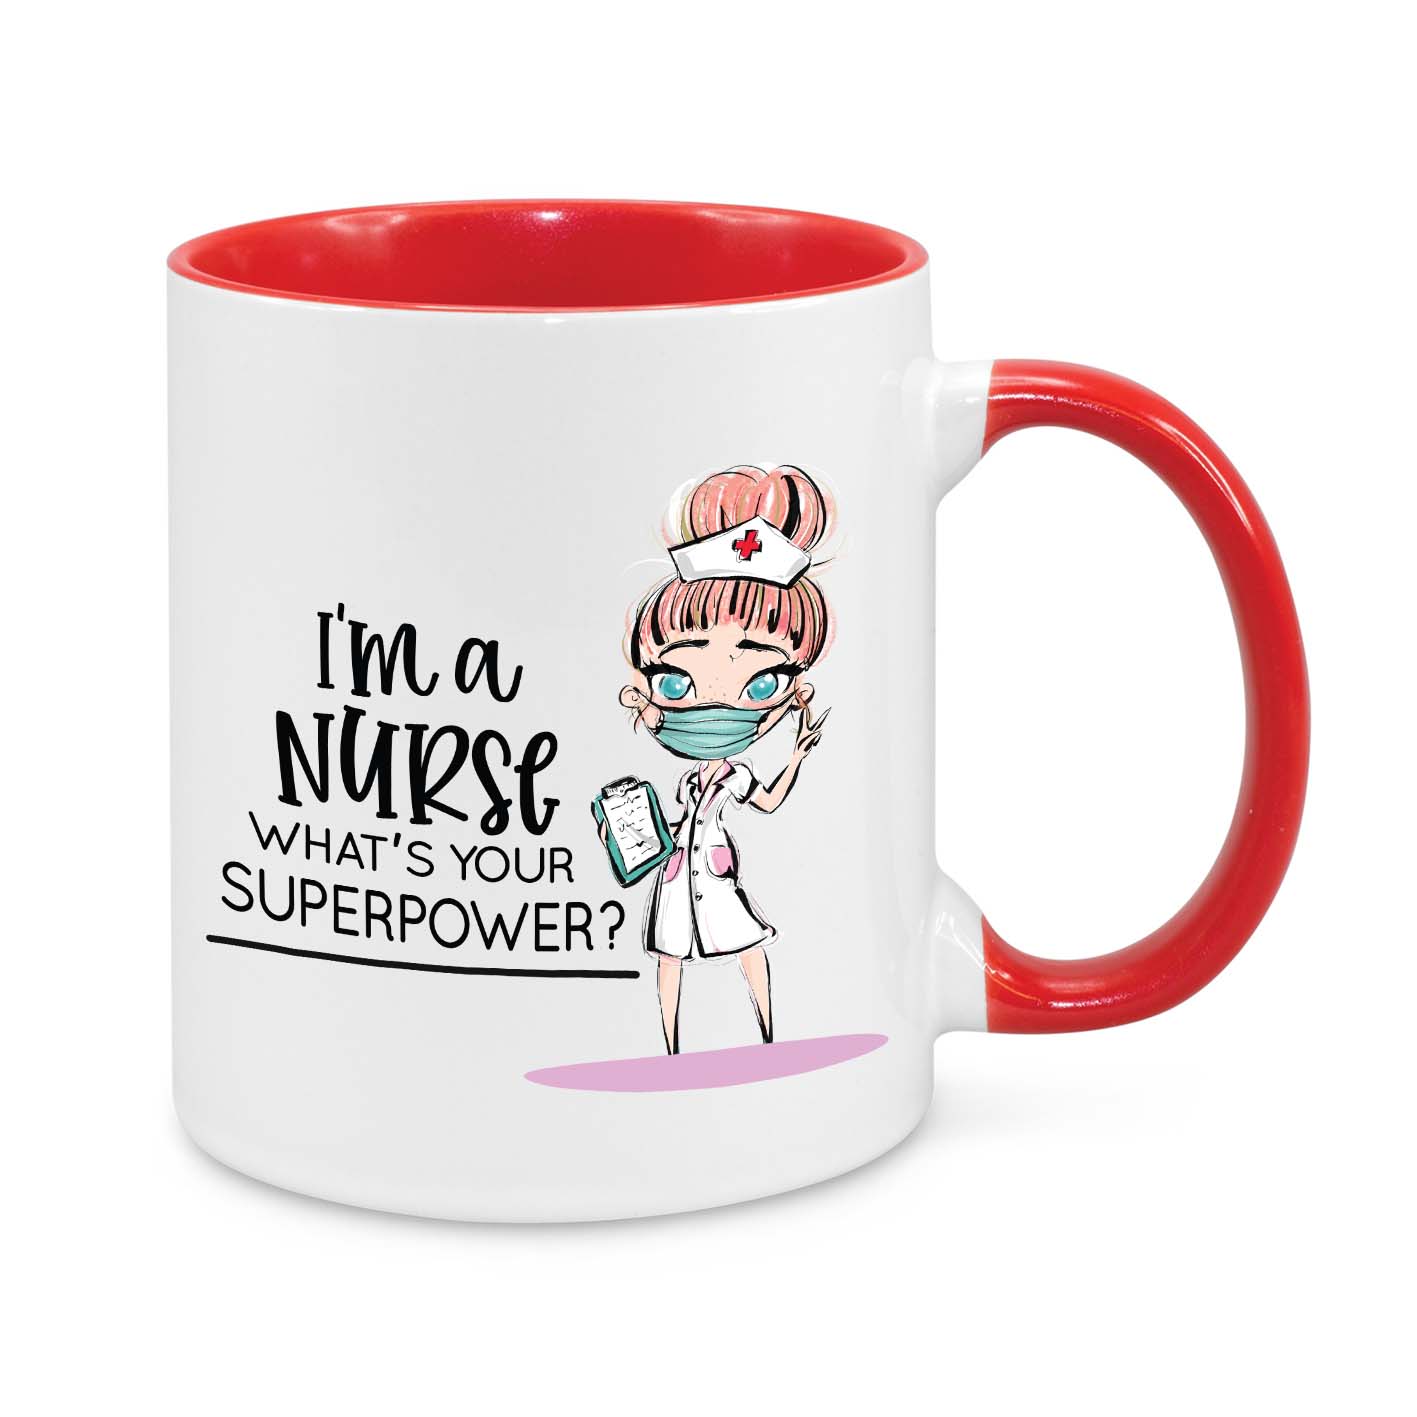 I am Nurse, what is Your Superpower? Novelty Mug